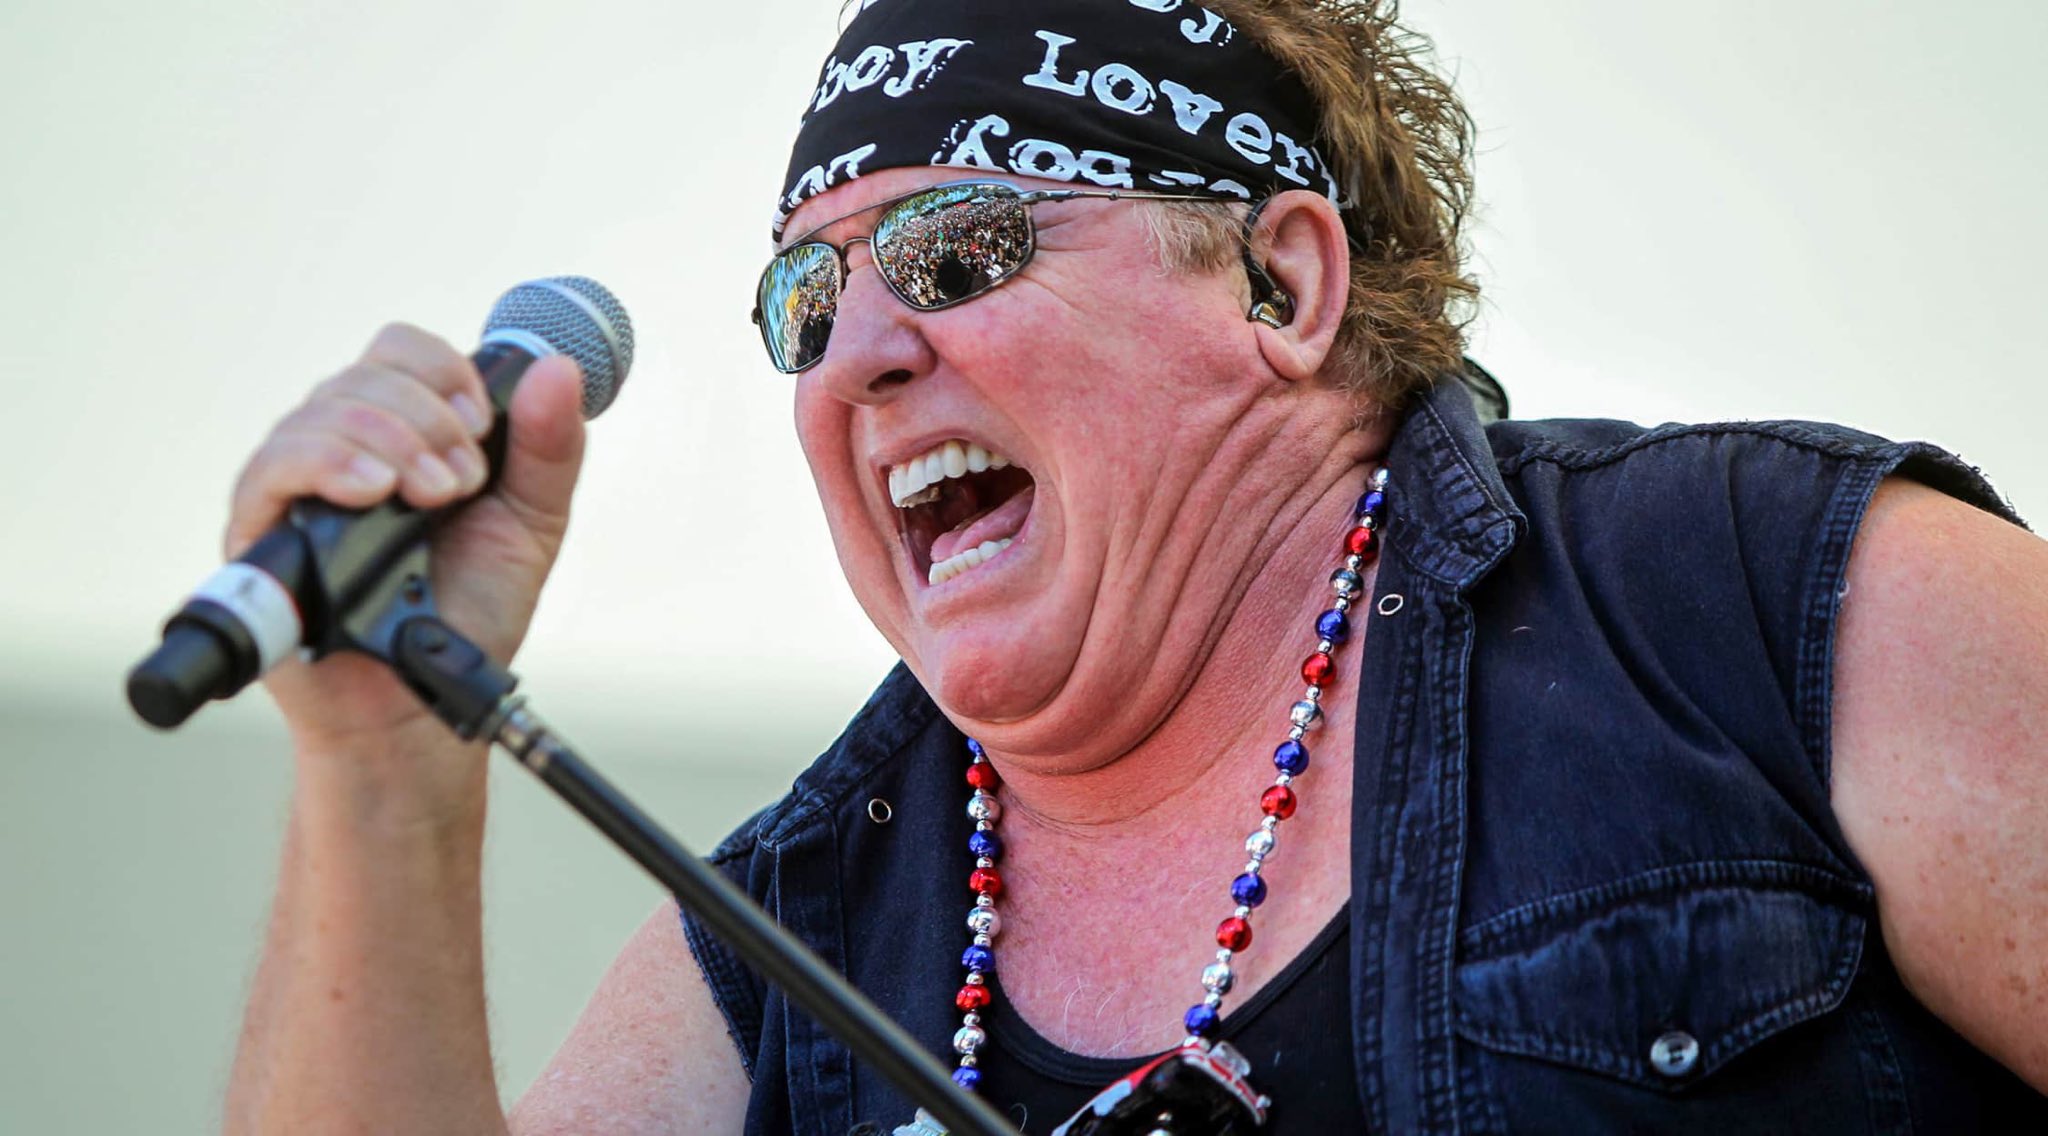 Who Is The Lead Singer Of Loverboy